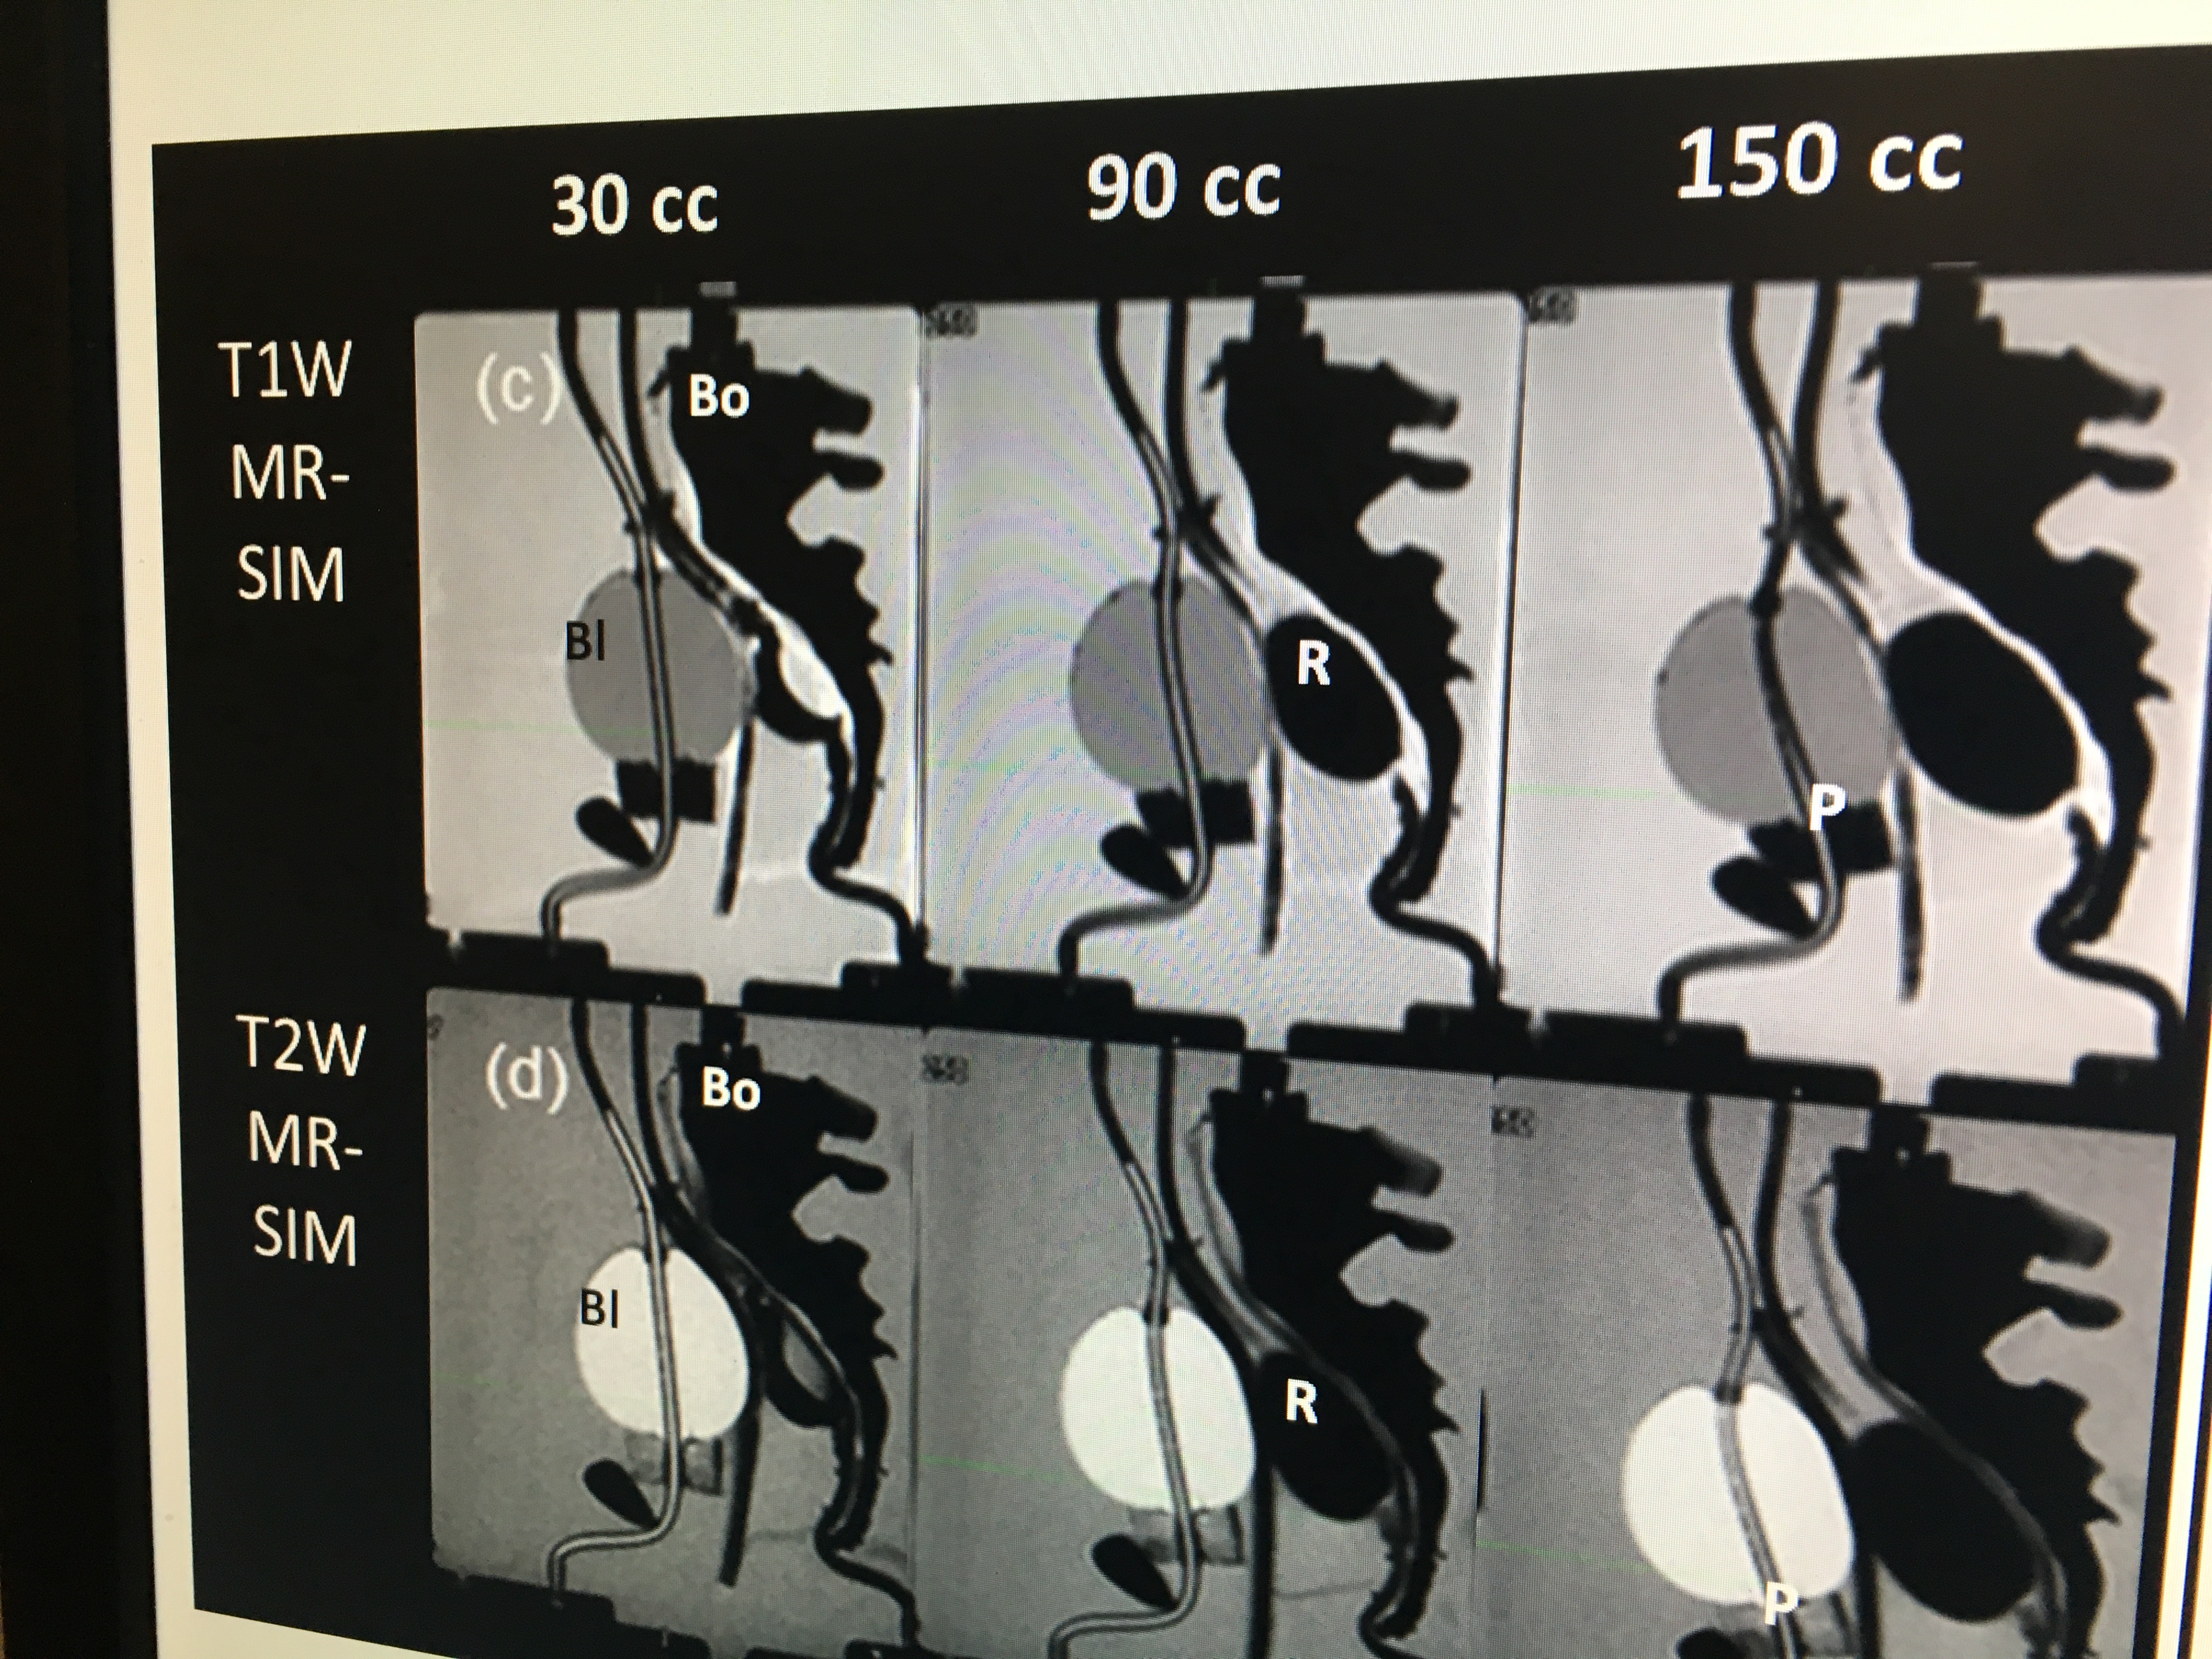 A set of synthetic CT images created from T1 and T2 weighted MR imaging of a prostate/rectum phantom at Henry Ford Hospital. The hospital is one of the research centers developing  synthetic CT imaging for treatment planning to avoid the need for CT scans of a patient just for treatment planning purposes when they already have a more detailed soft tissue MRI exam of  the anatomy.